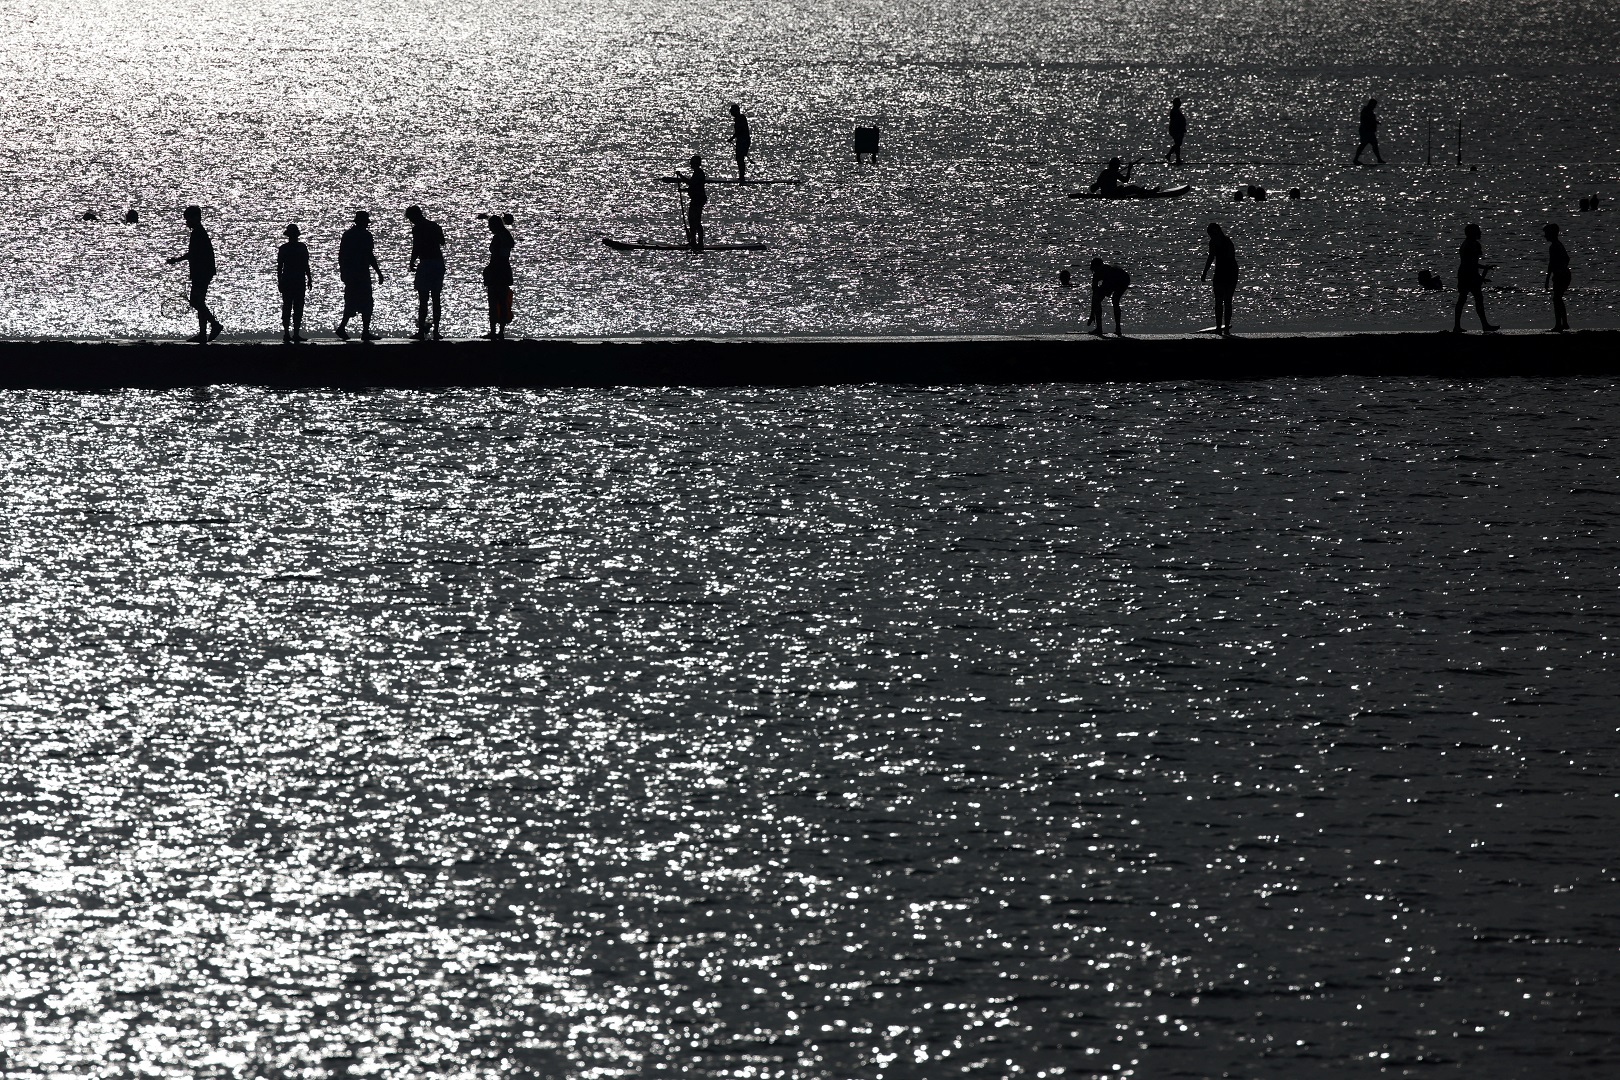 People walk on the ledge of a bathing pool in the sea in Margate, Britain, July 17, 2022. Photo: Reuters